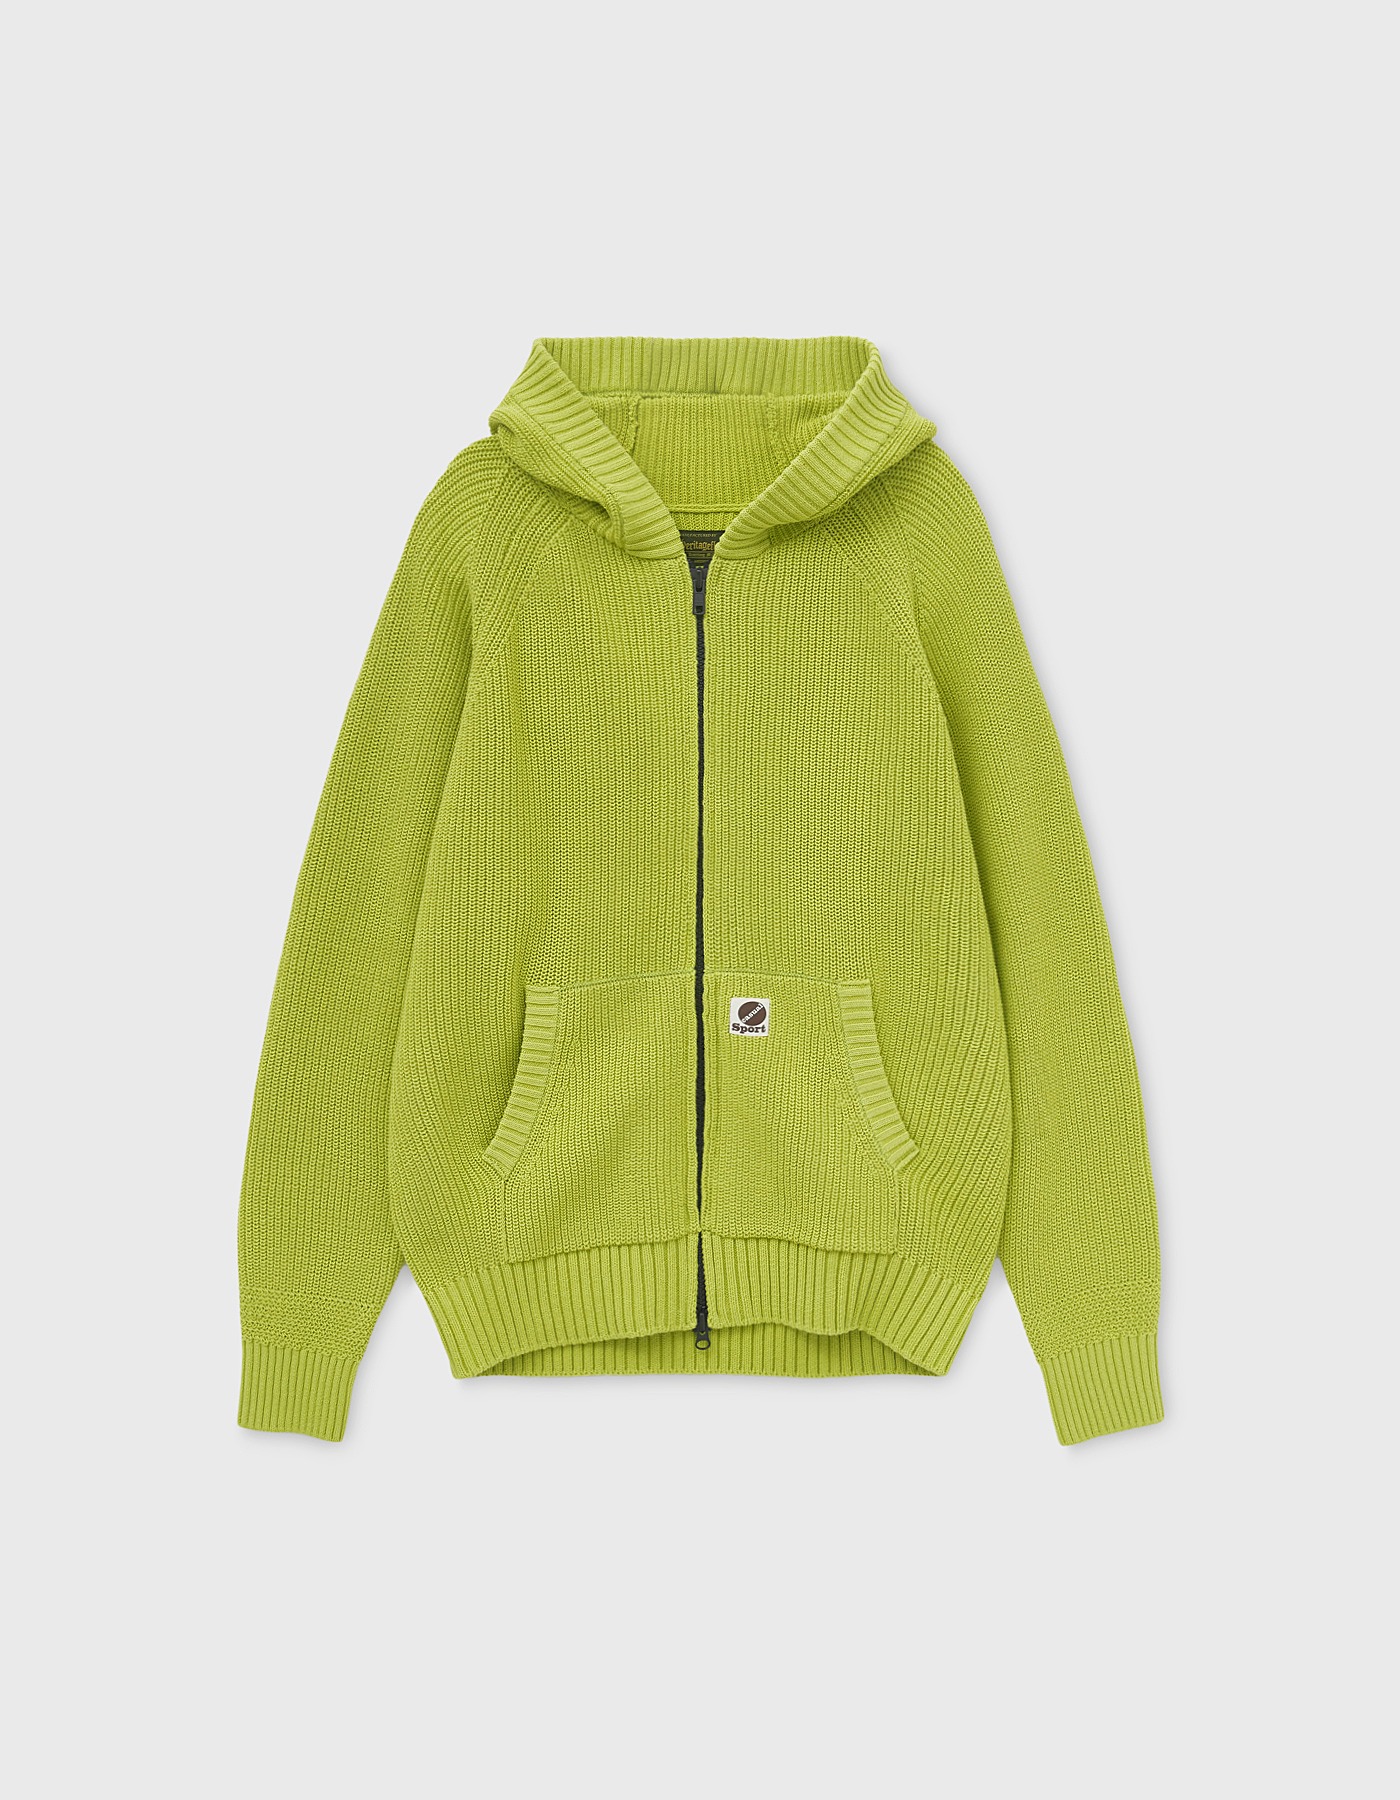 COTTON ZIP-UP HOODIE / Lime